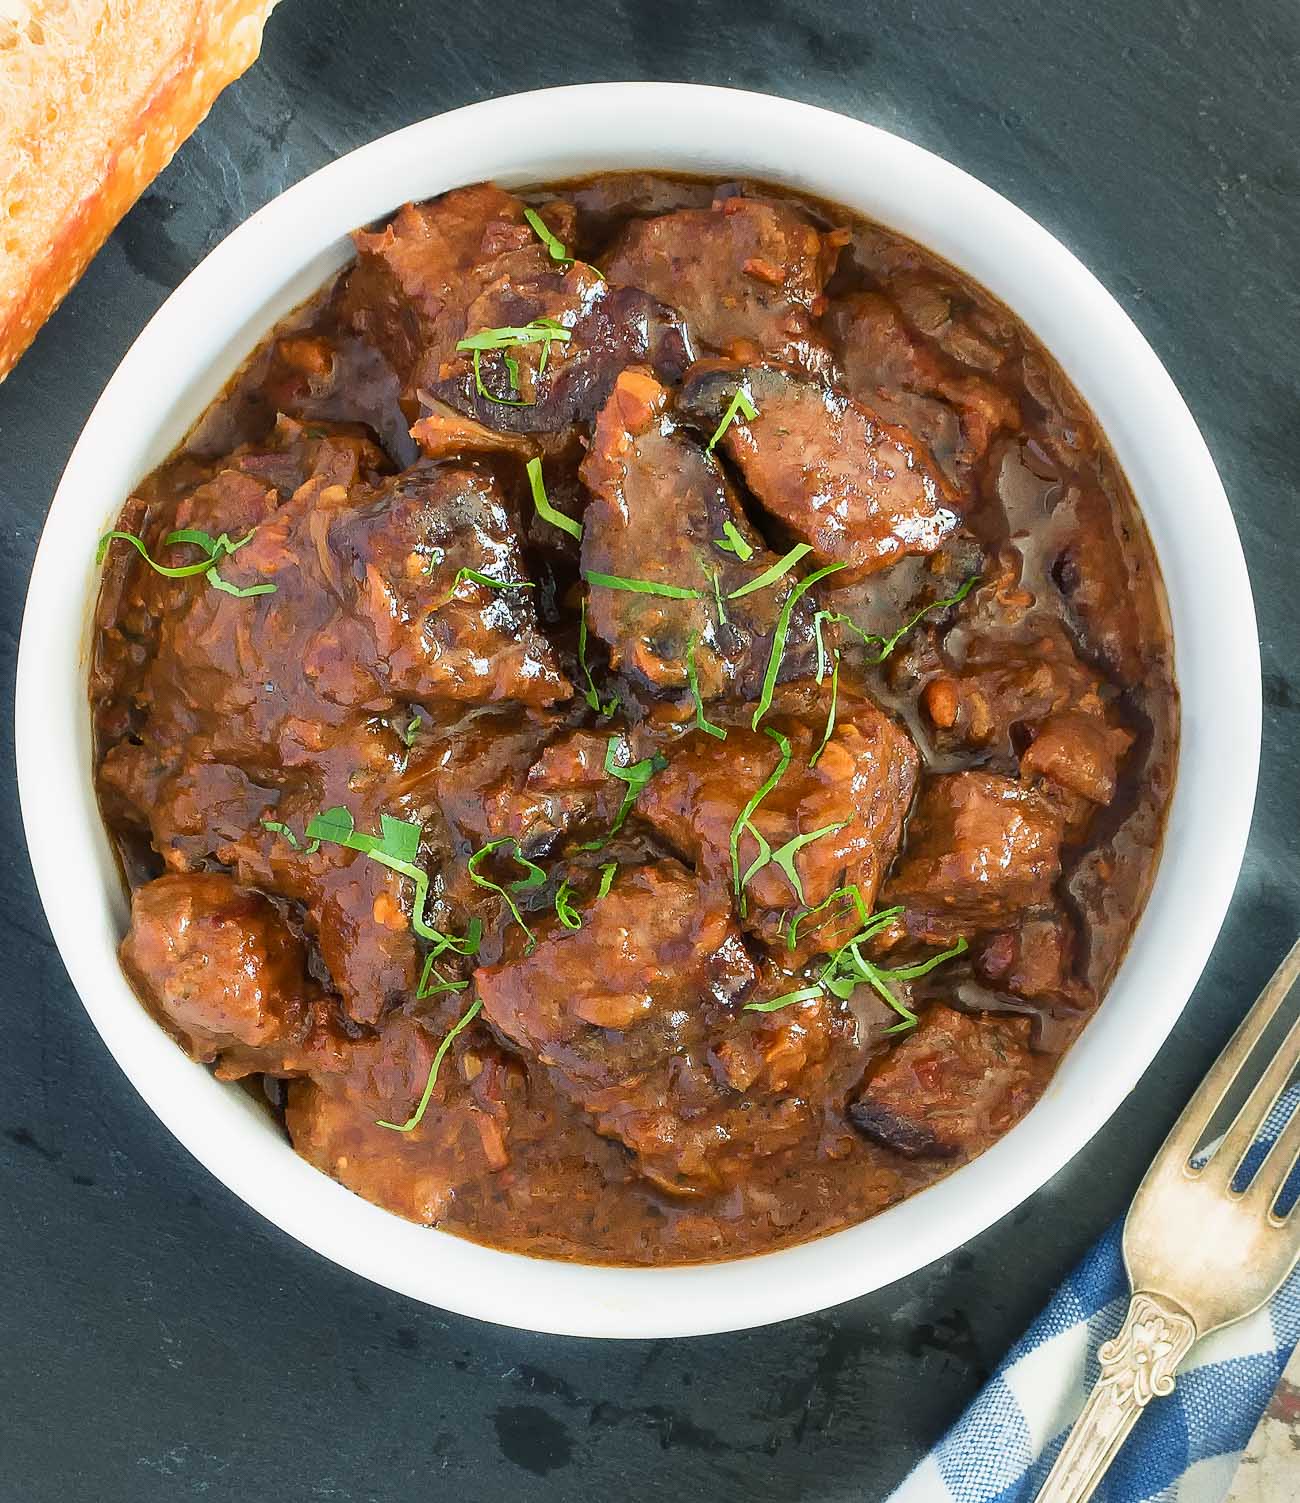 Beef and beer stew - carbonnade a la flamande is all about beer, beef and onions.